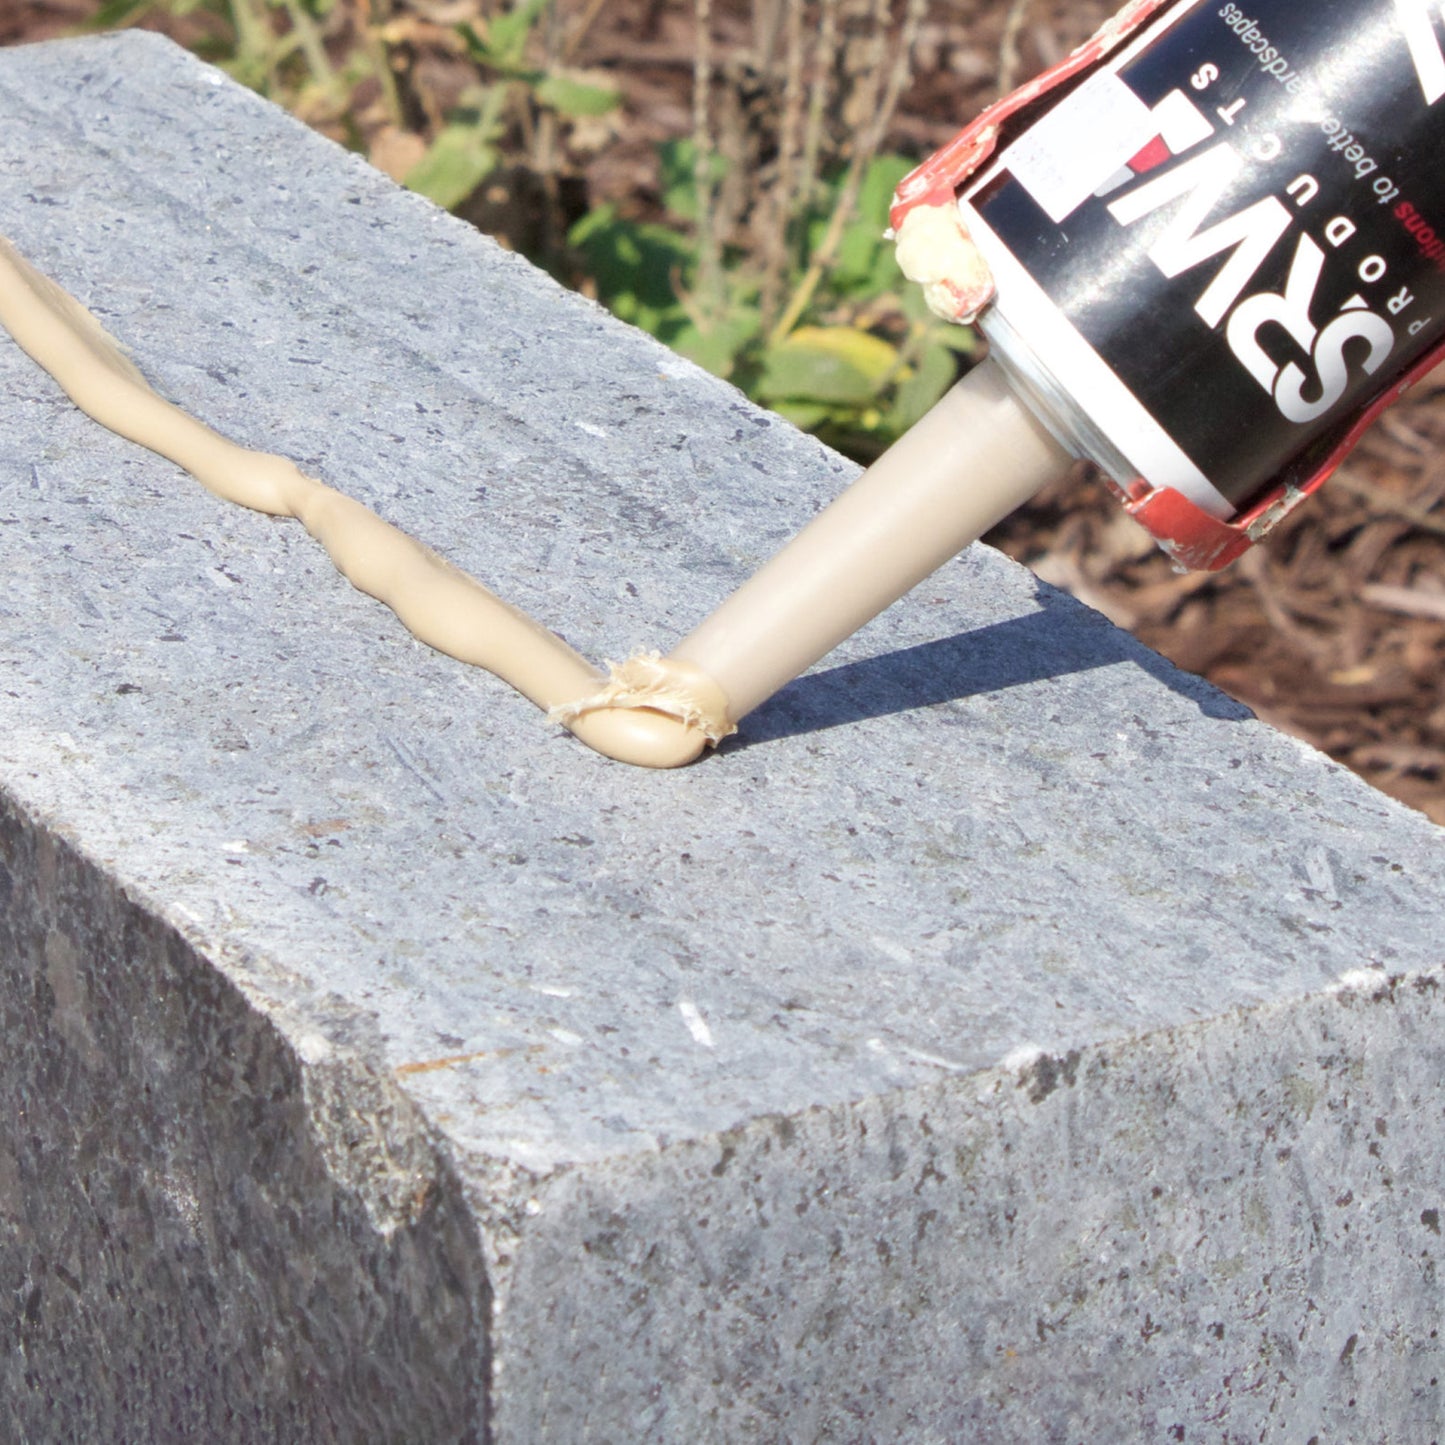 SRW Products Superior Strength Solvent-Based Adhesive